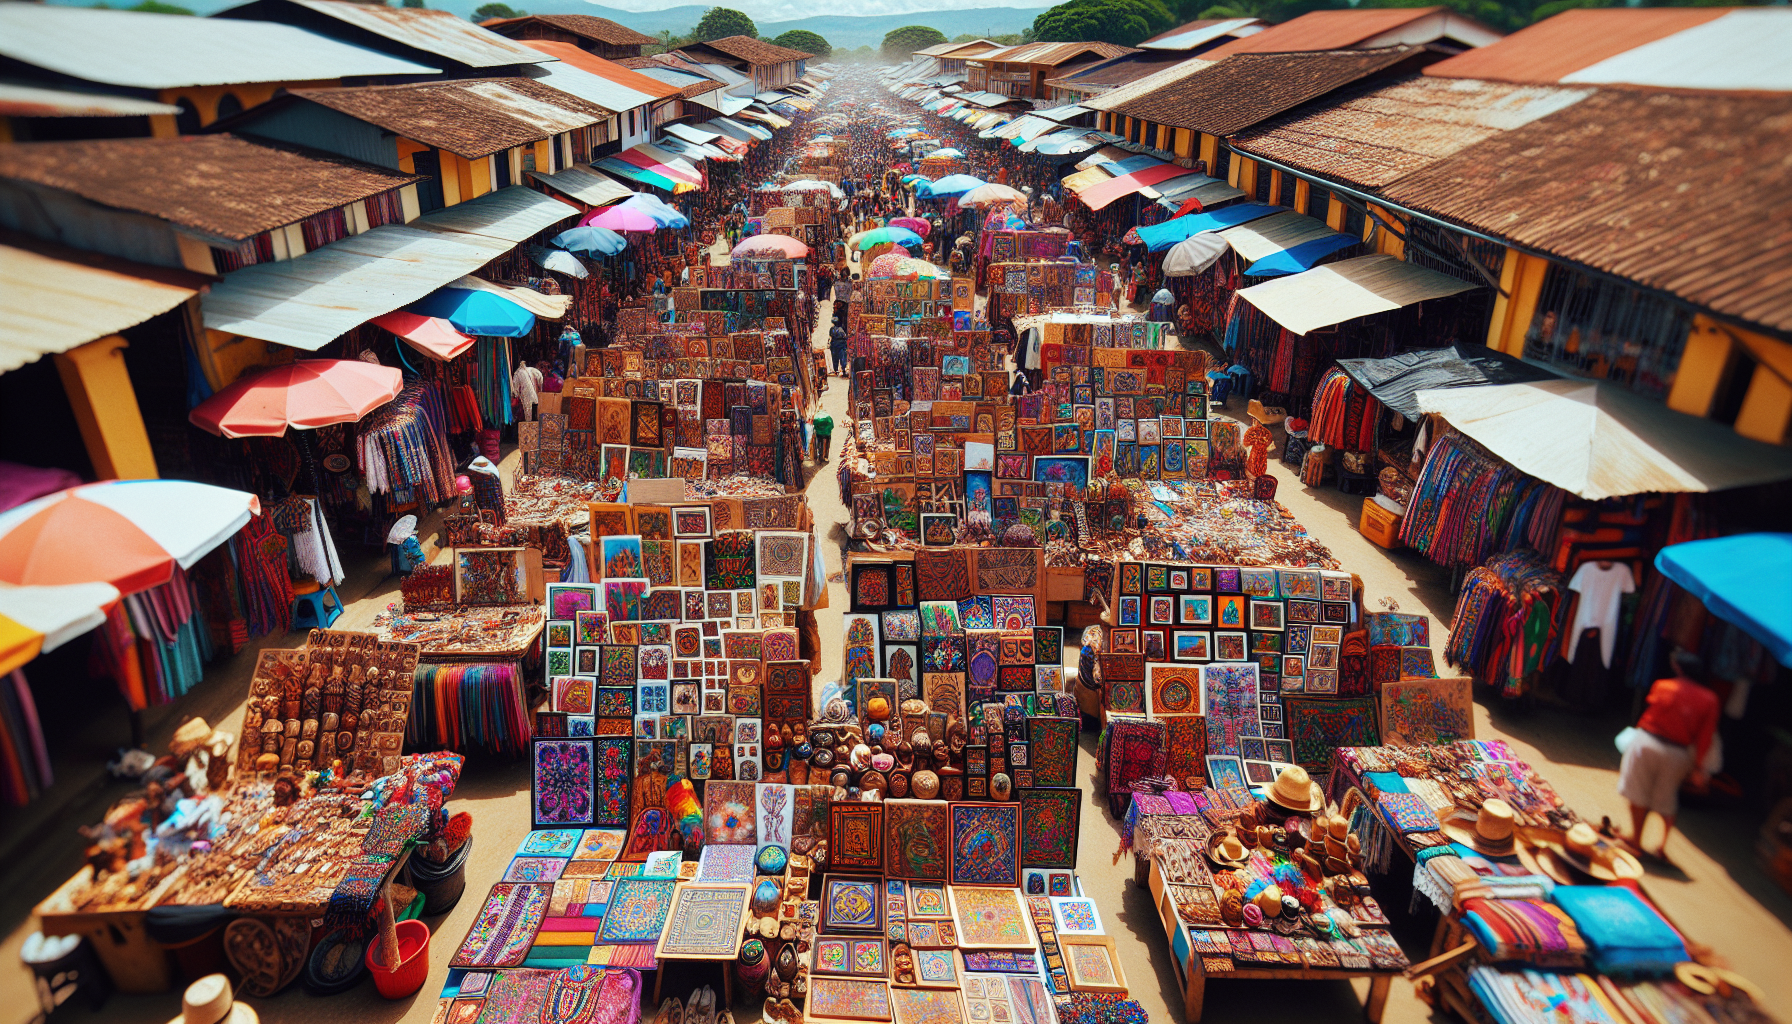 What Are The Best Markets For Shopping And Souvenirs In Nicaragua?